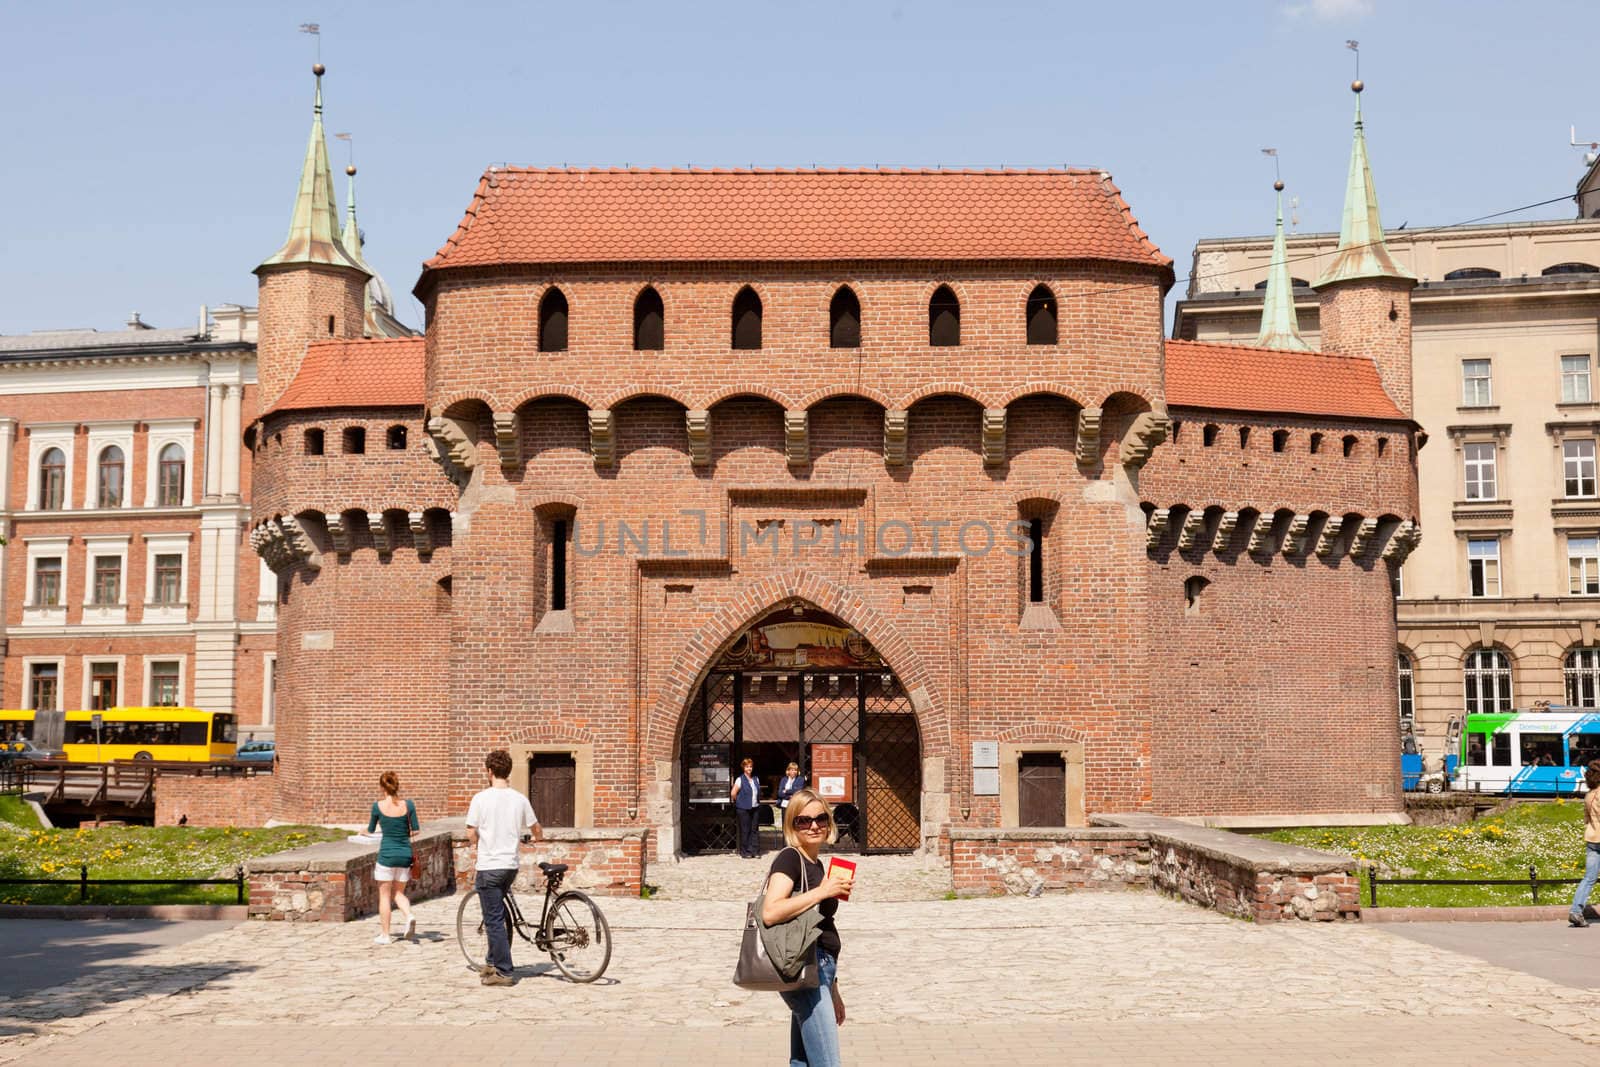 Kraków barbican is a barbican – a fortified outpost once connected to the city walls.